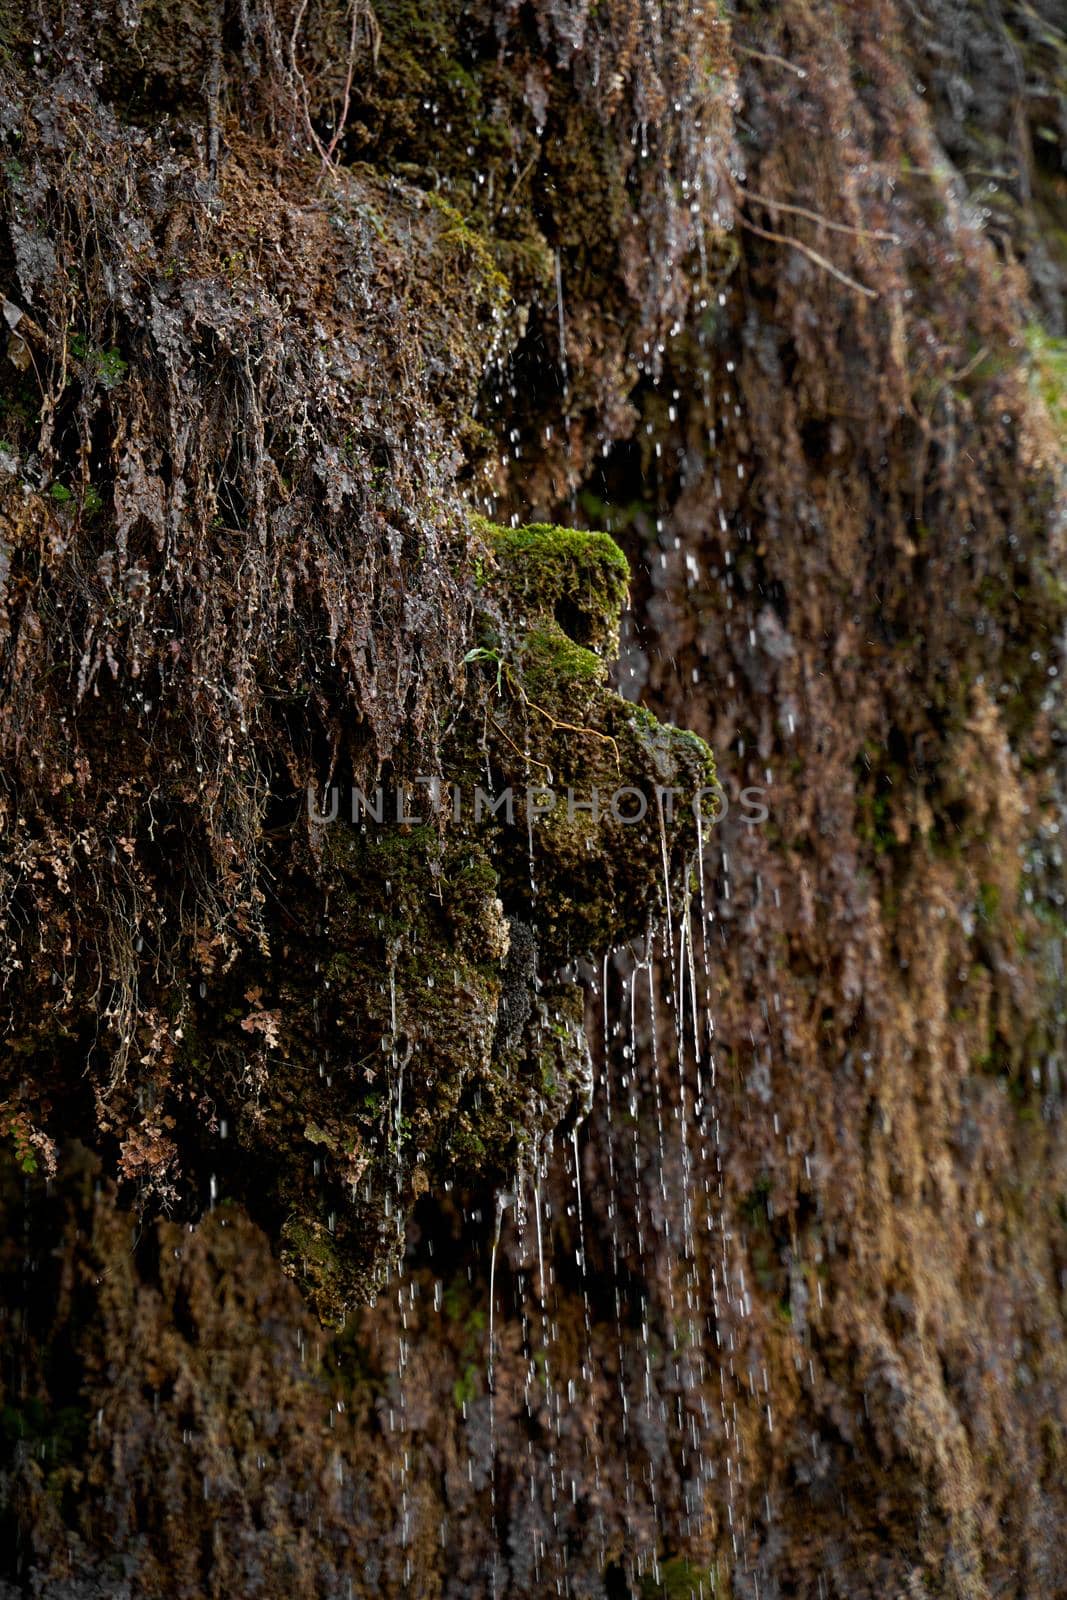 Water flows down a mountain rock overgrown with a plant.